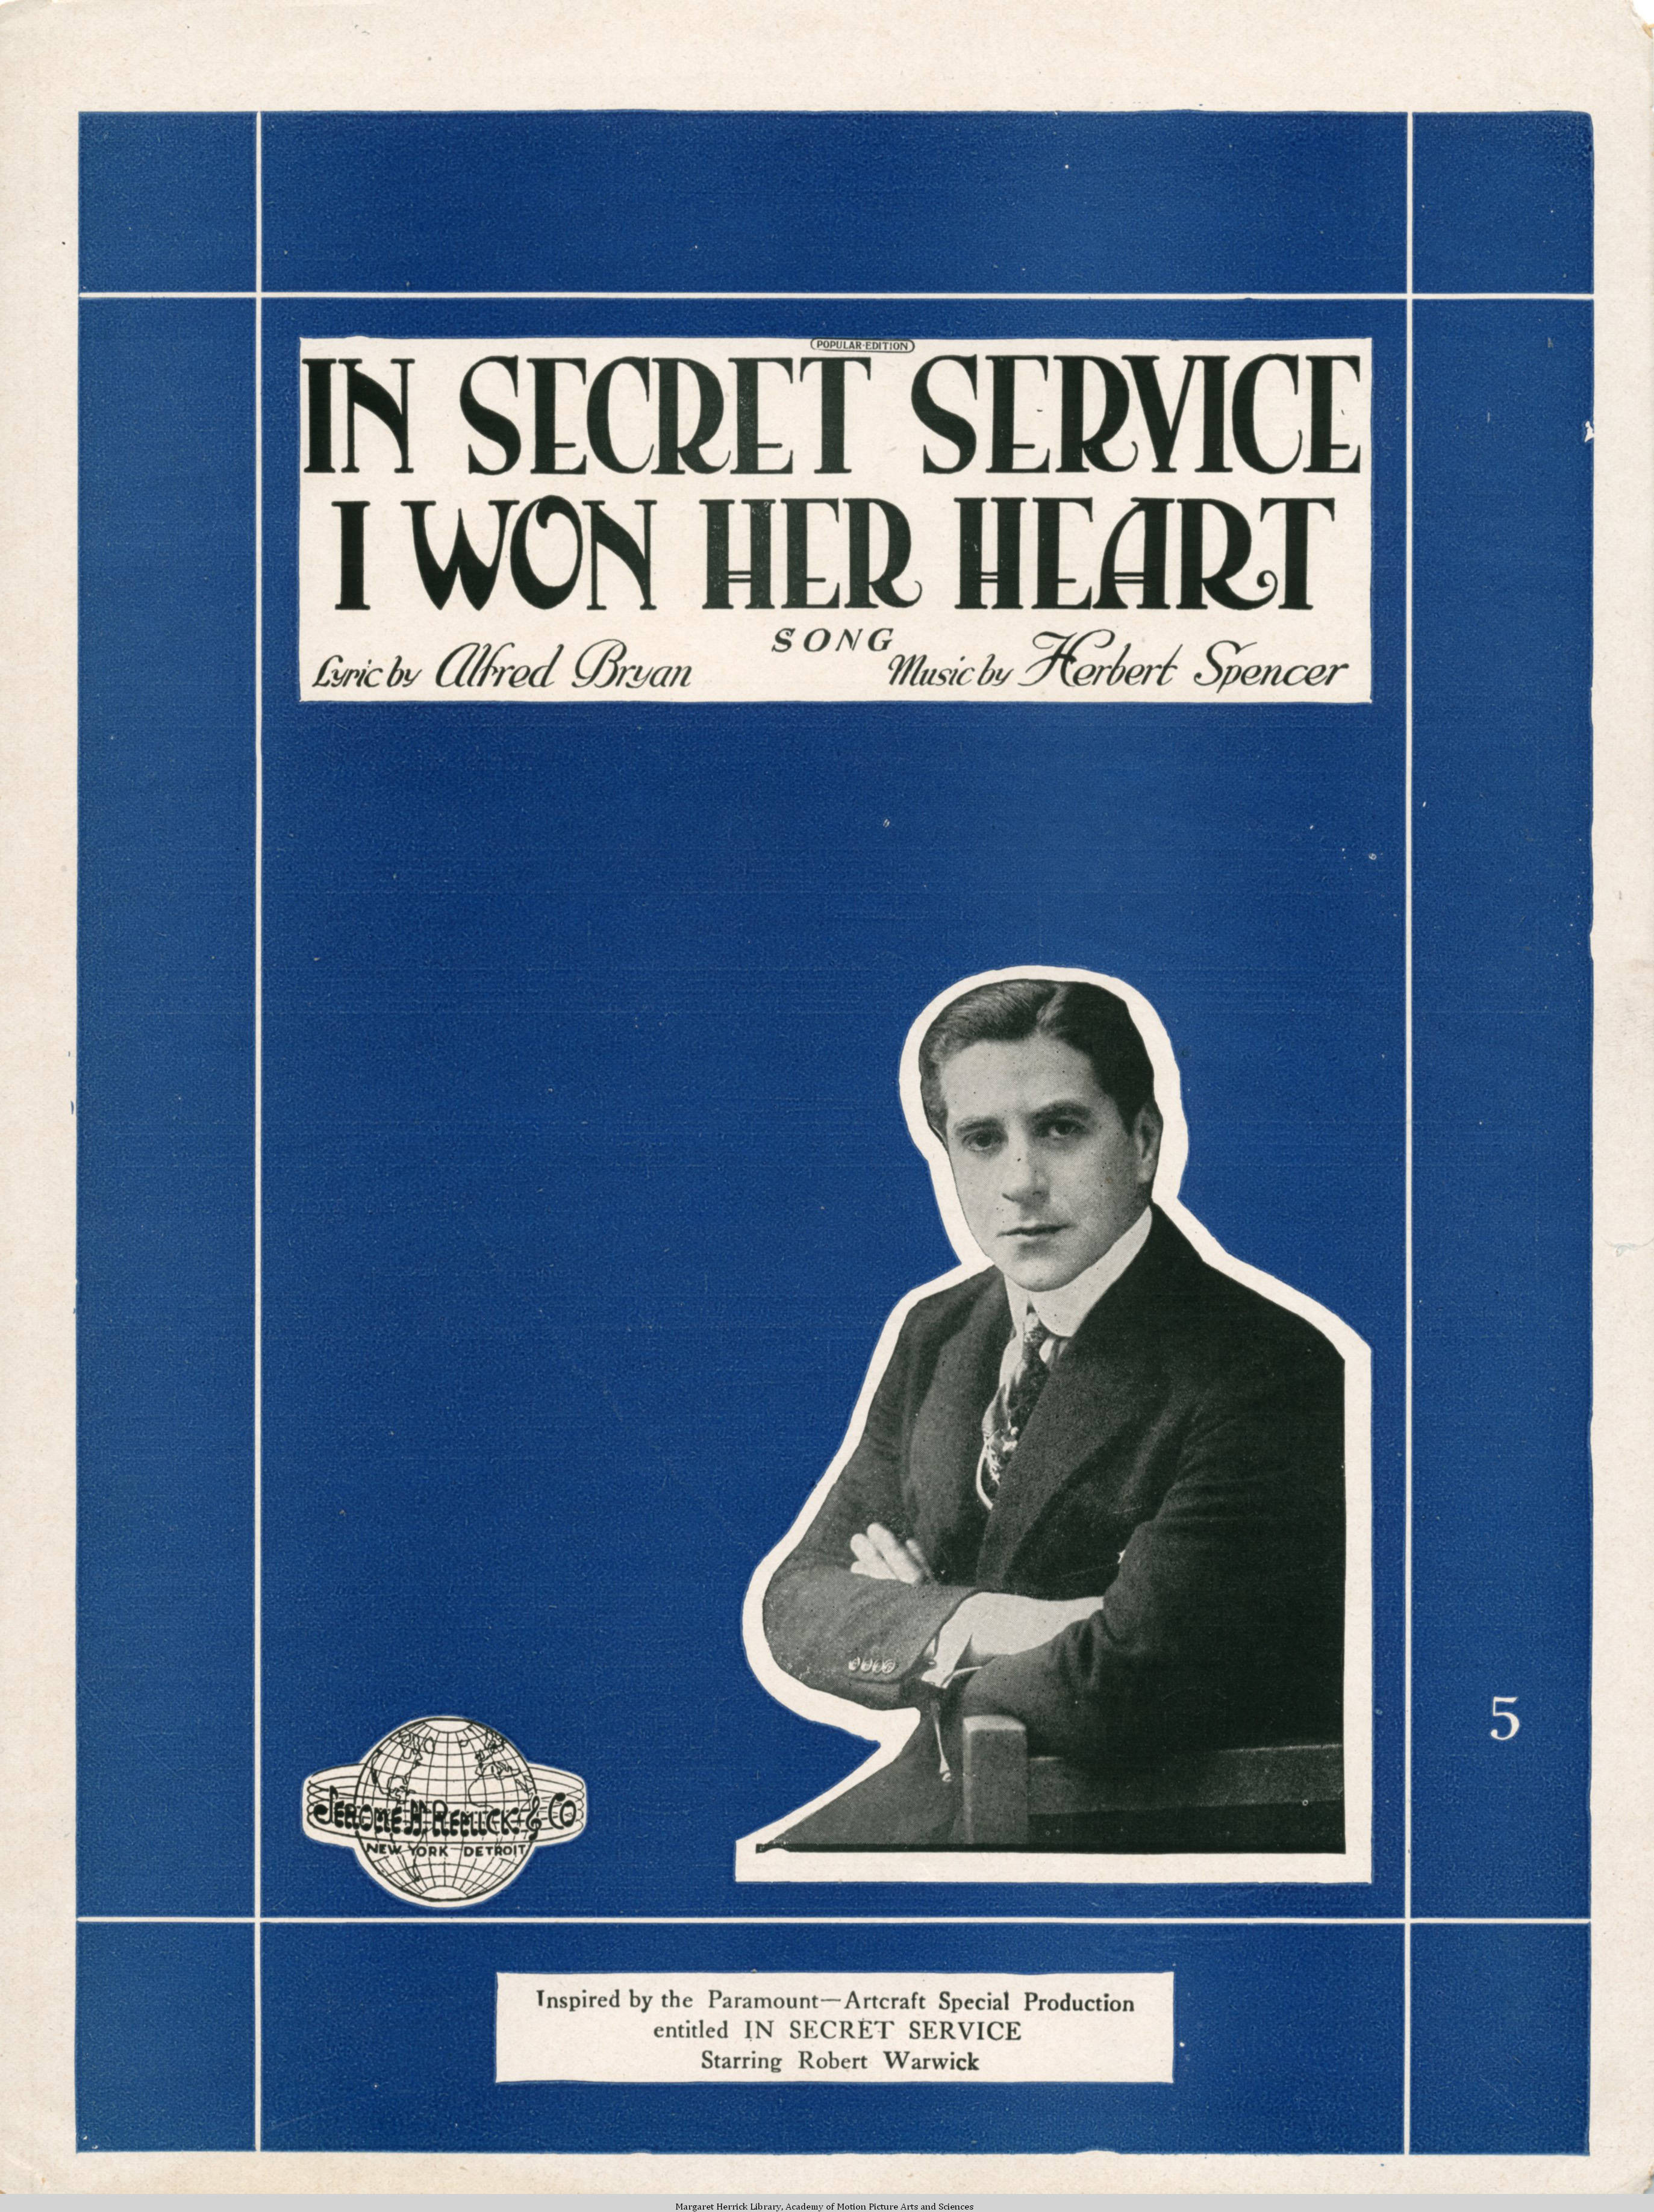 Sheet music cover - IN SECRET SERVICE I WON HER HEART - SONG (1919)